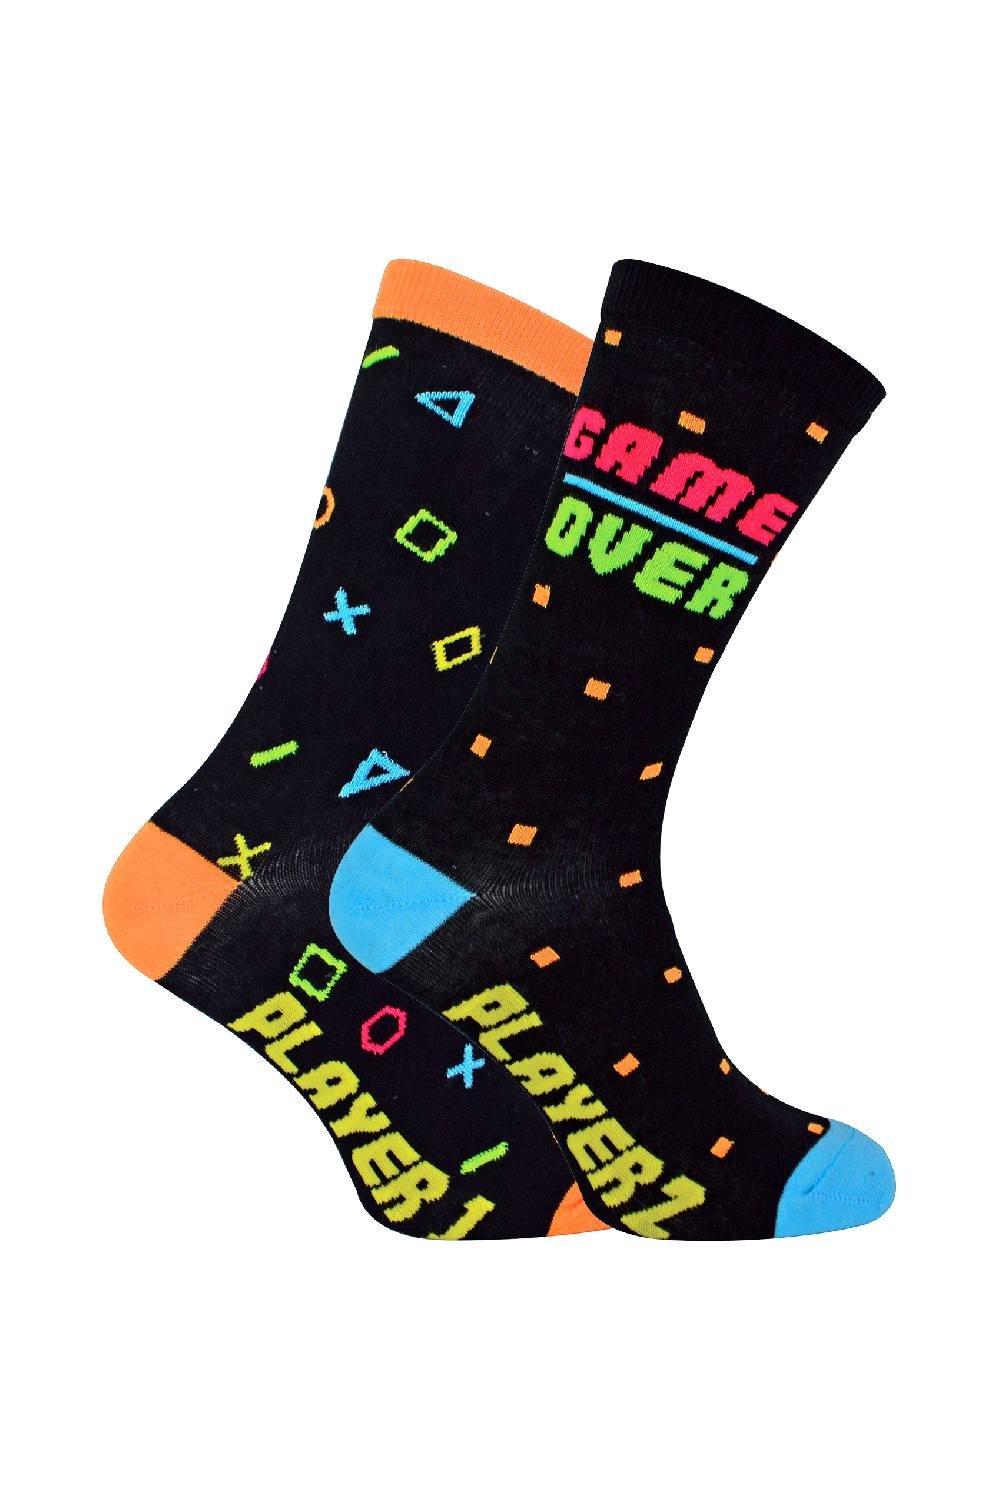 2 Pairs Novelty Soft Cotton Rich Gaming Socks in a Gift Box